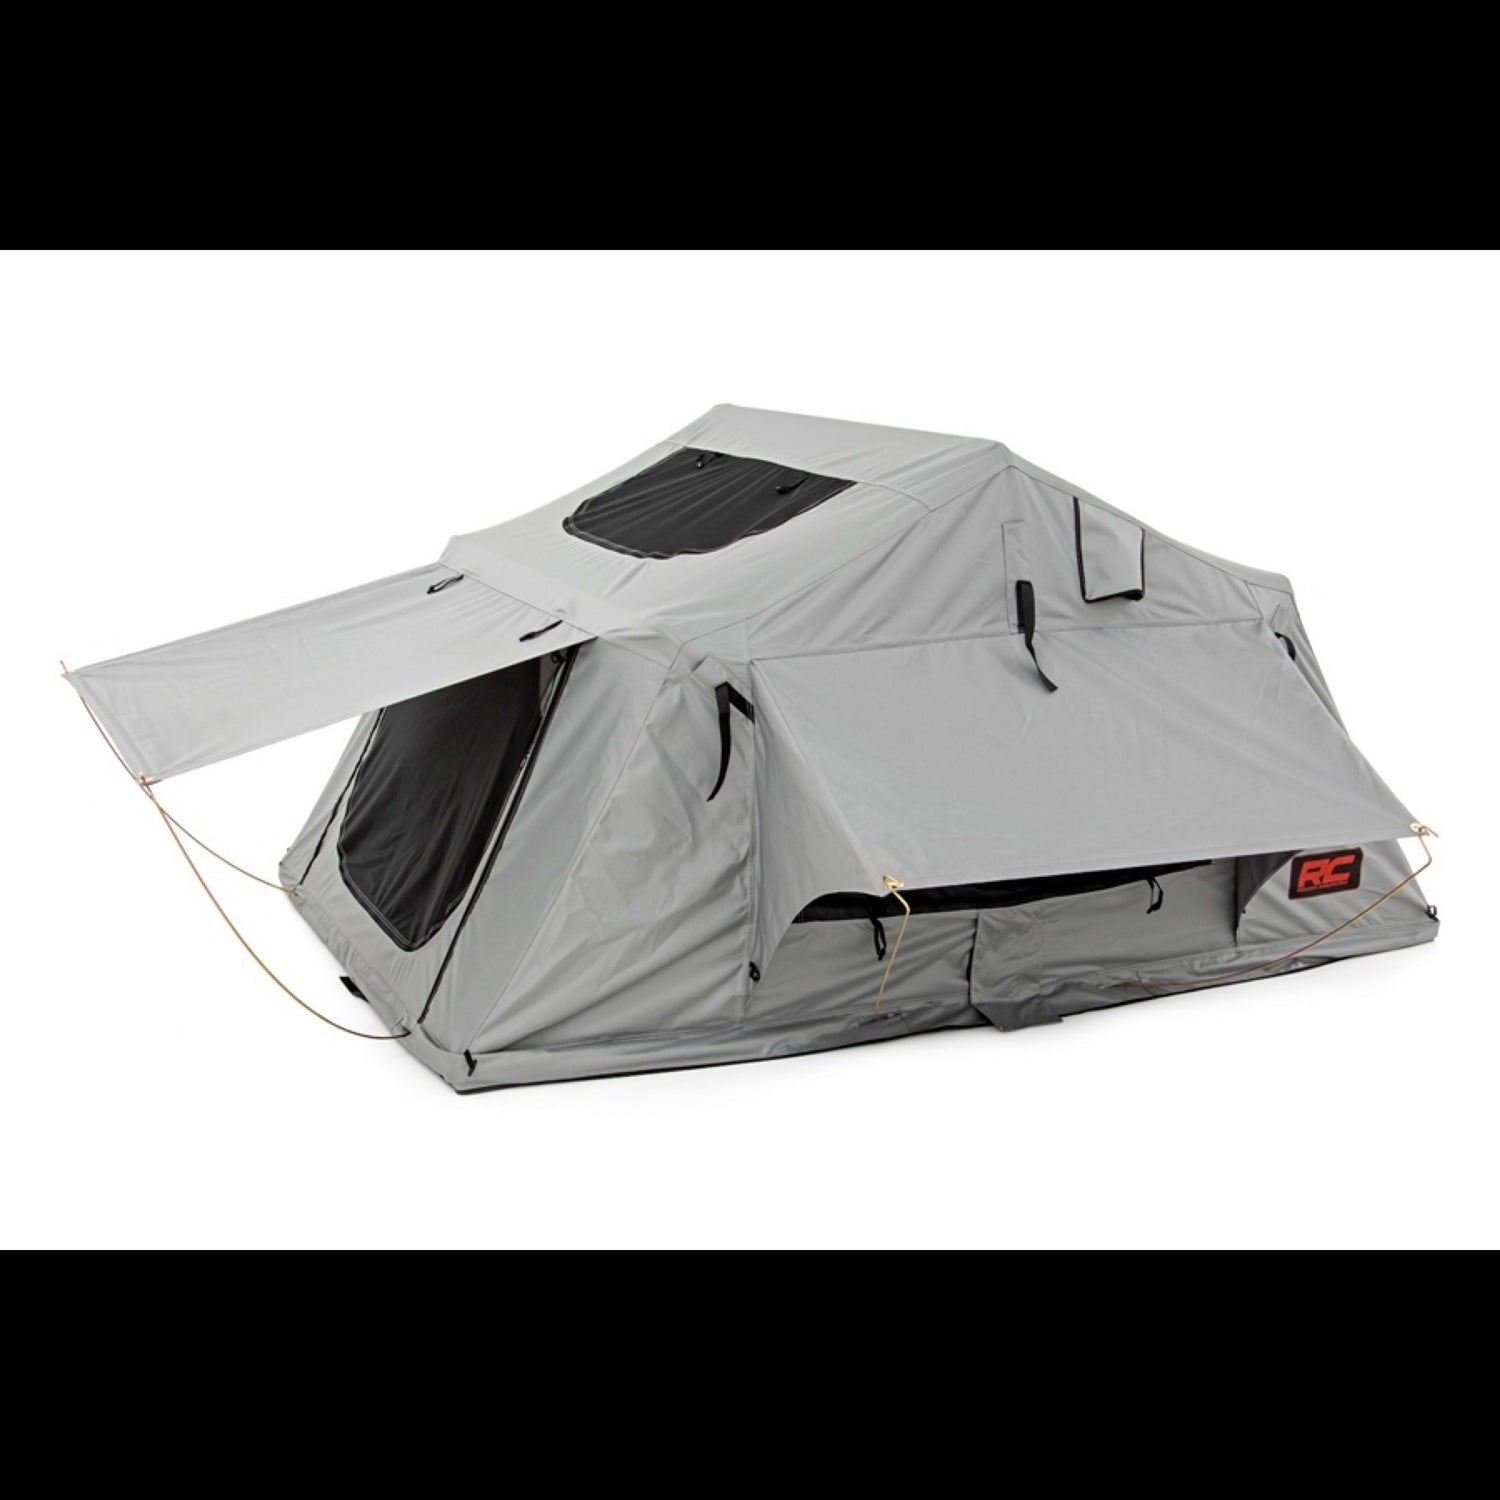 Rough Country Roof top tent in grey